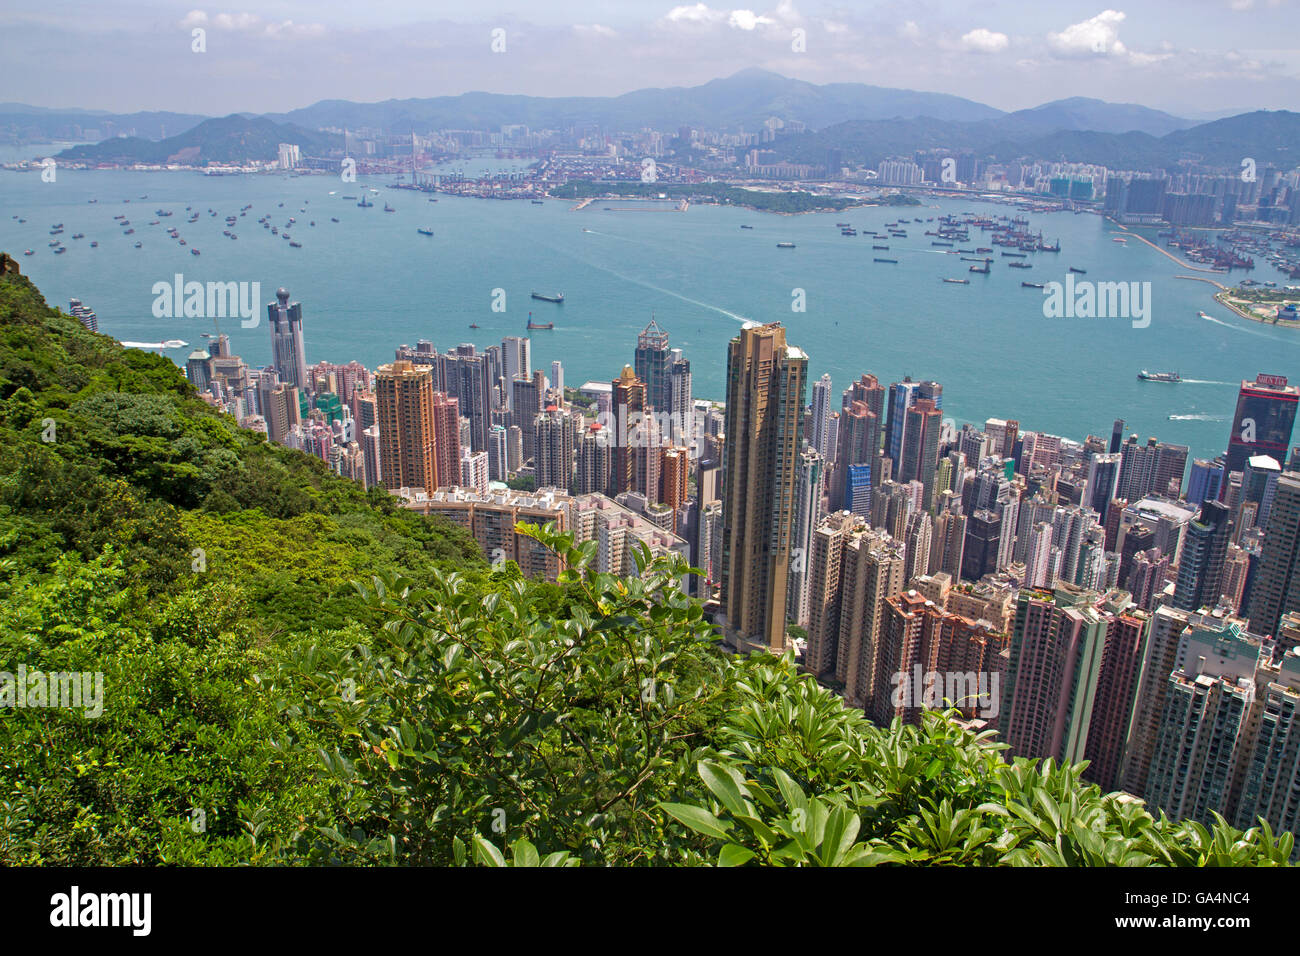 View over Hong Kong from the slopes of Victoria Peak Stock Photo